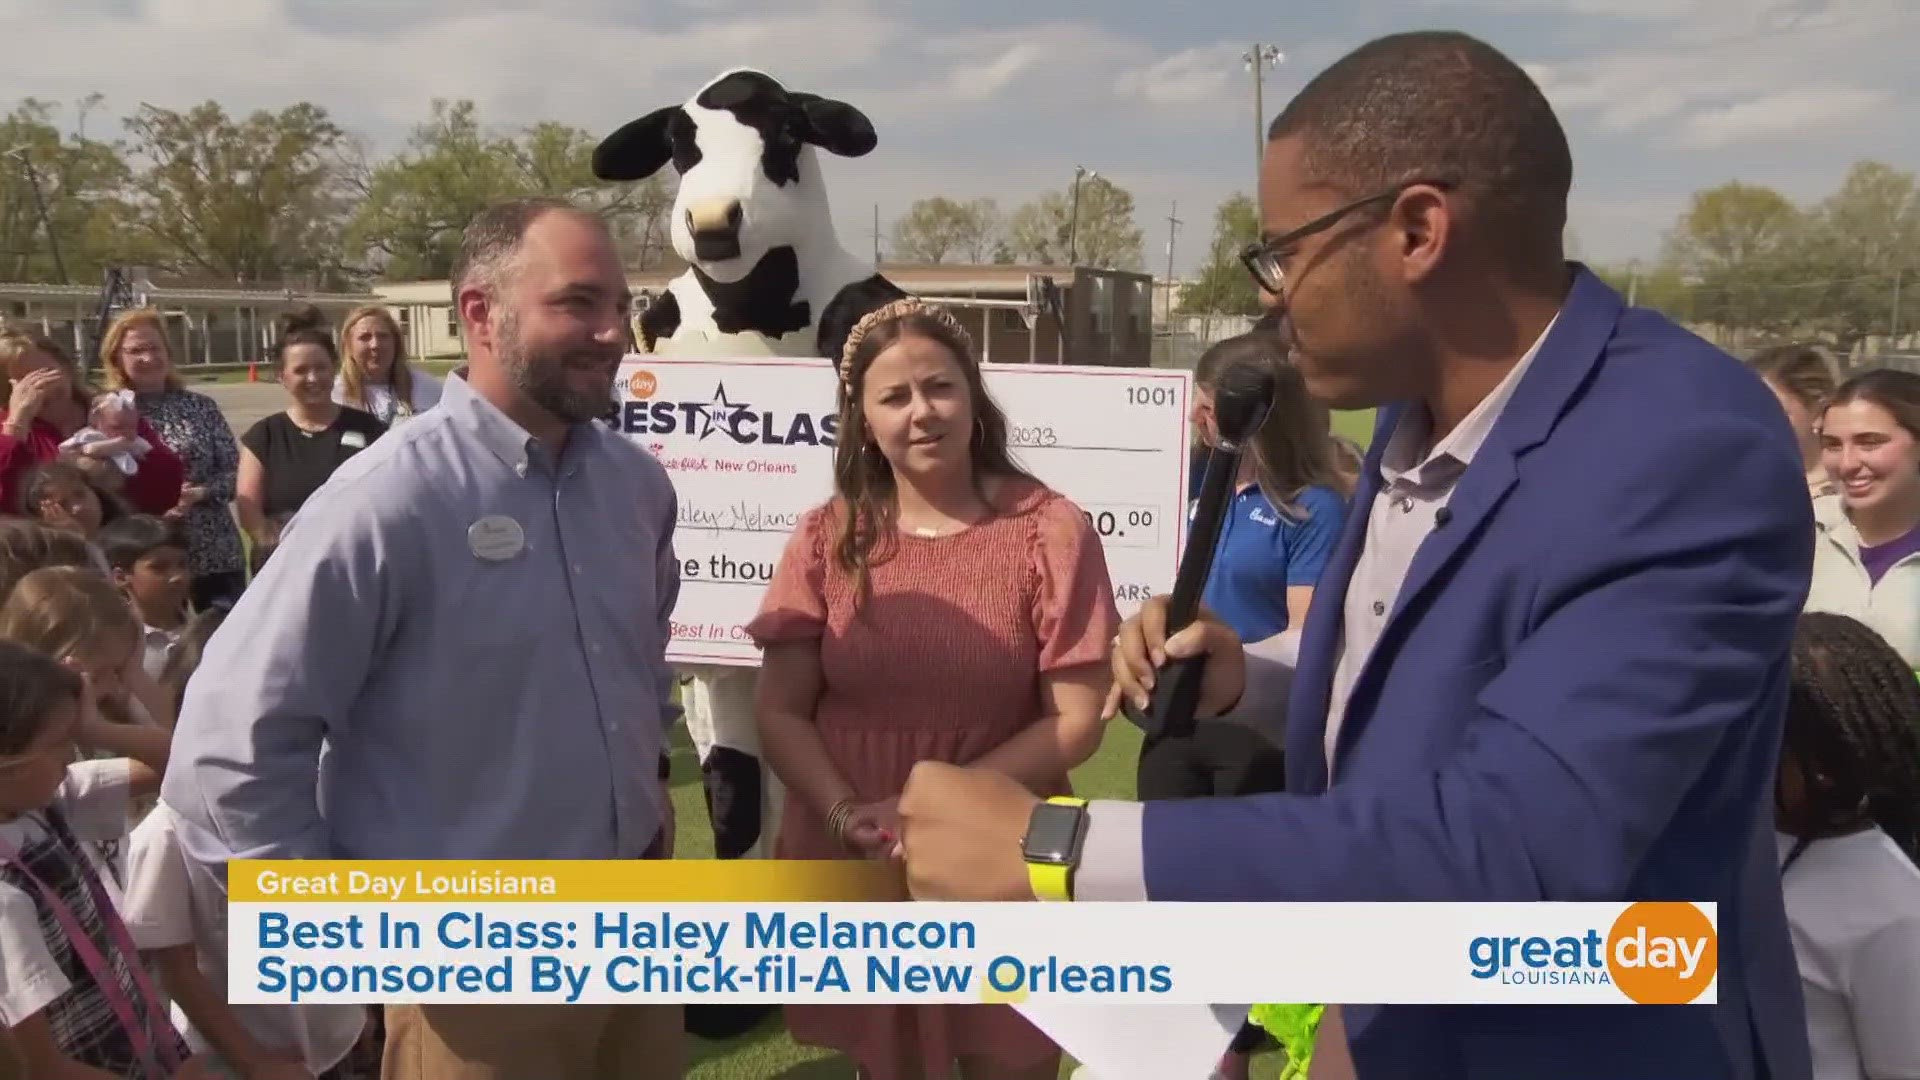 Great Day is proud to partner with Chick-fil-A New Orleans with the Best in Class Award. Haley Melancon of Kenner Discovery is the winner this month!